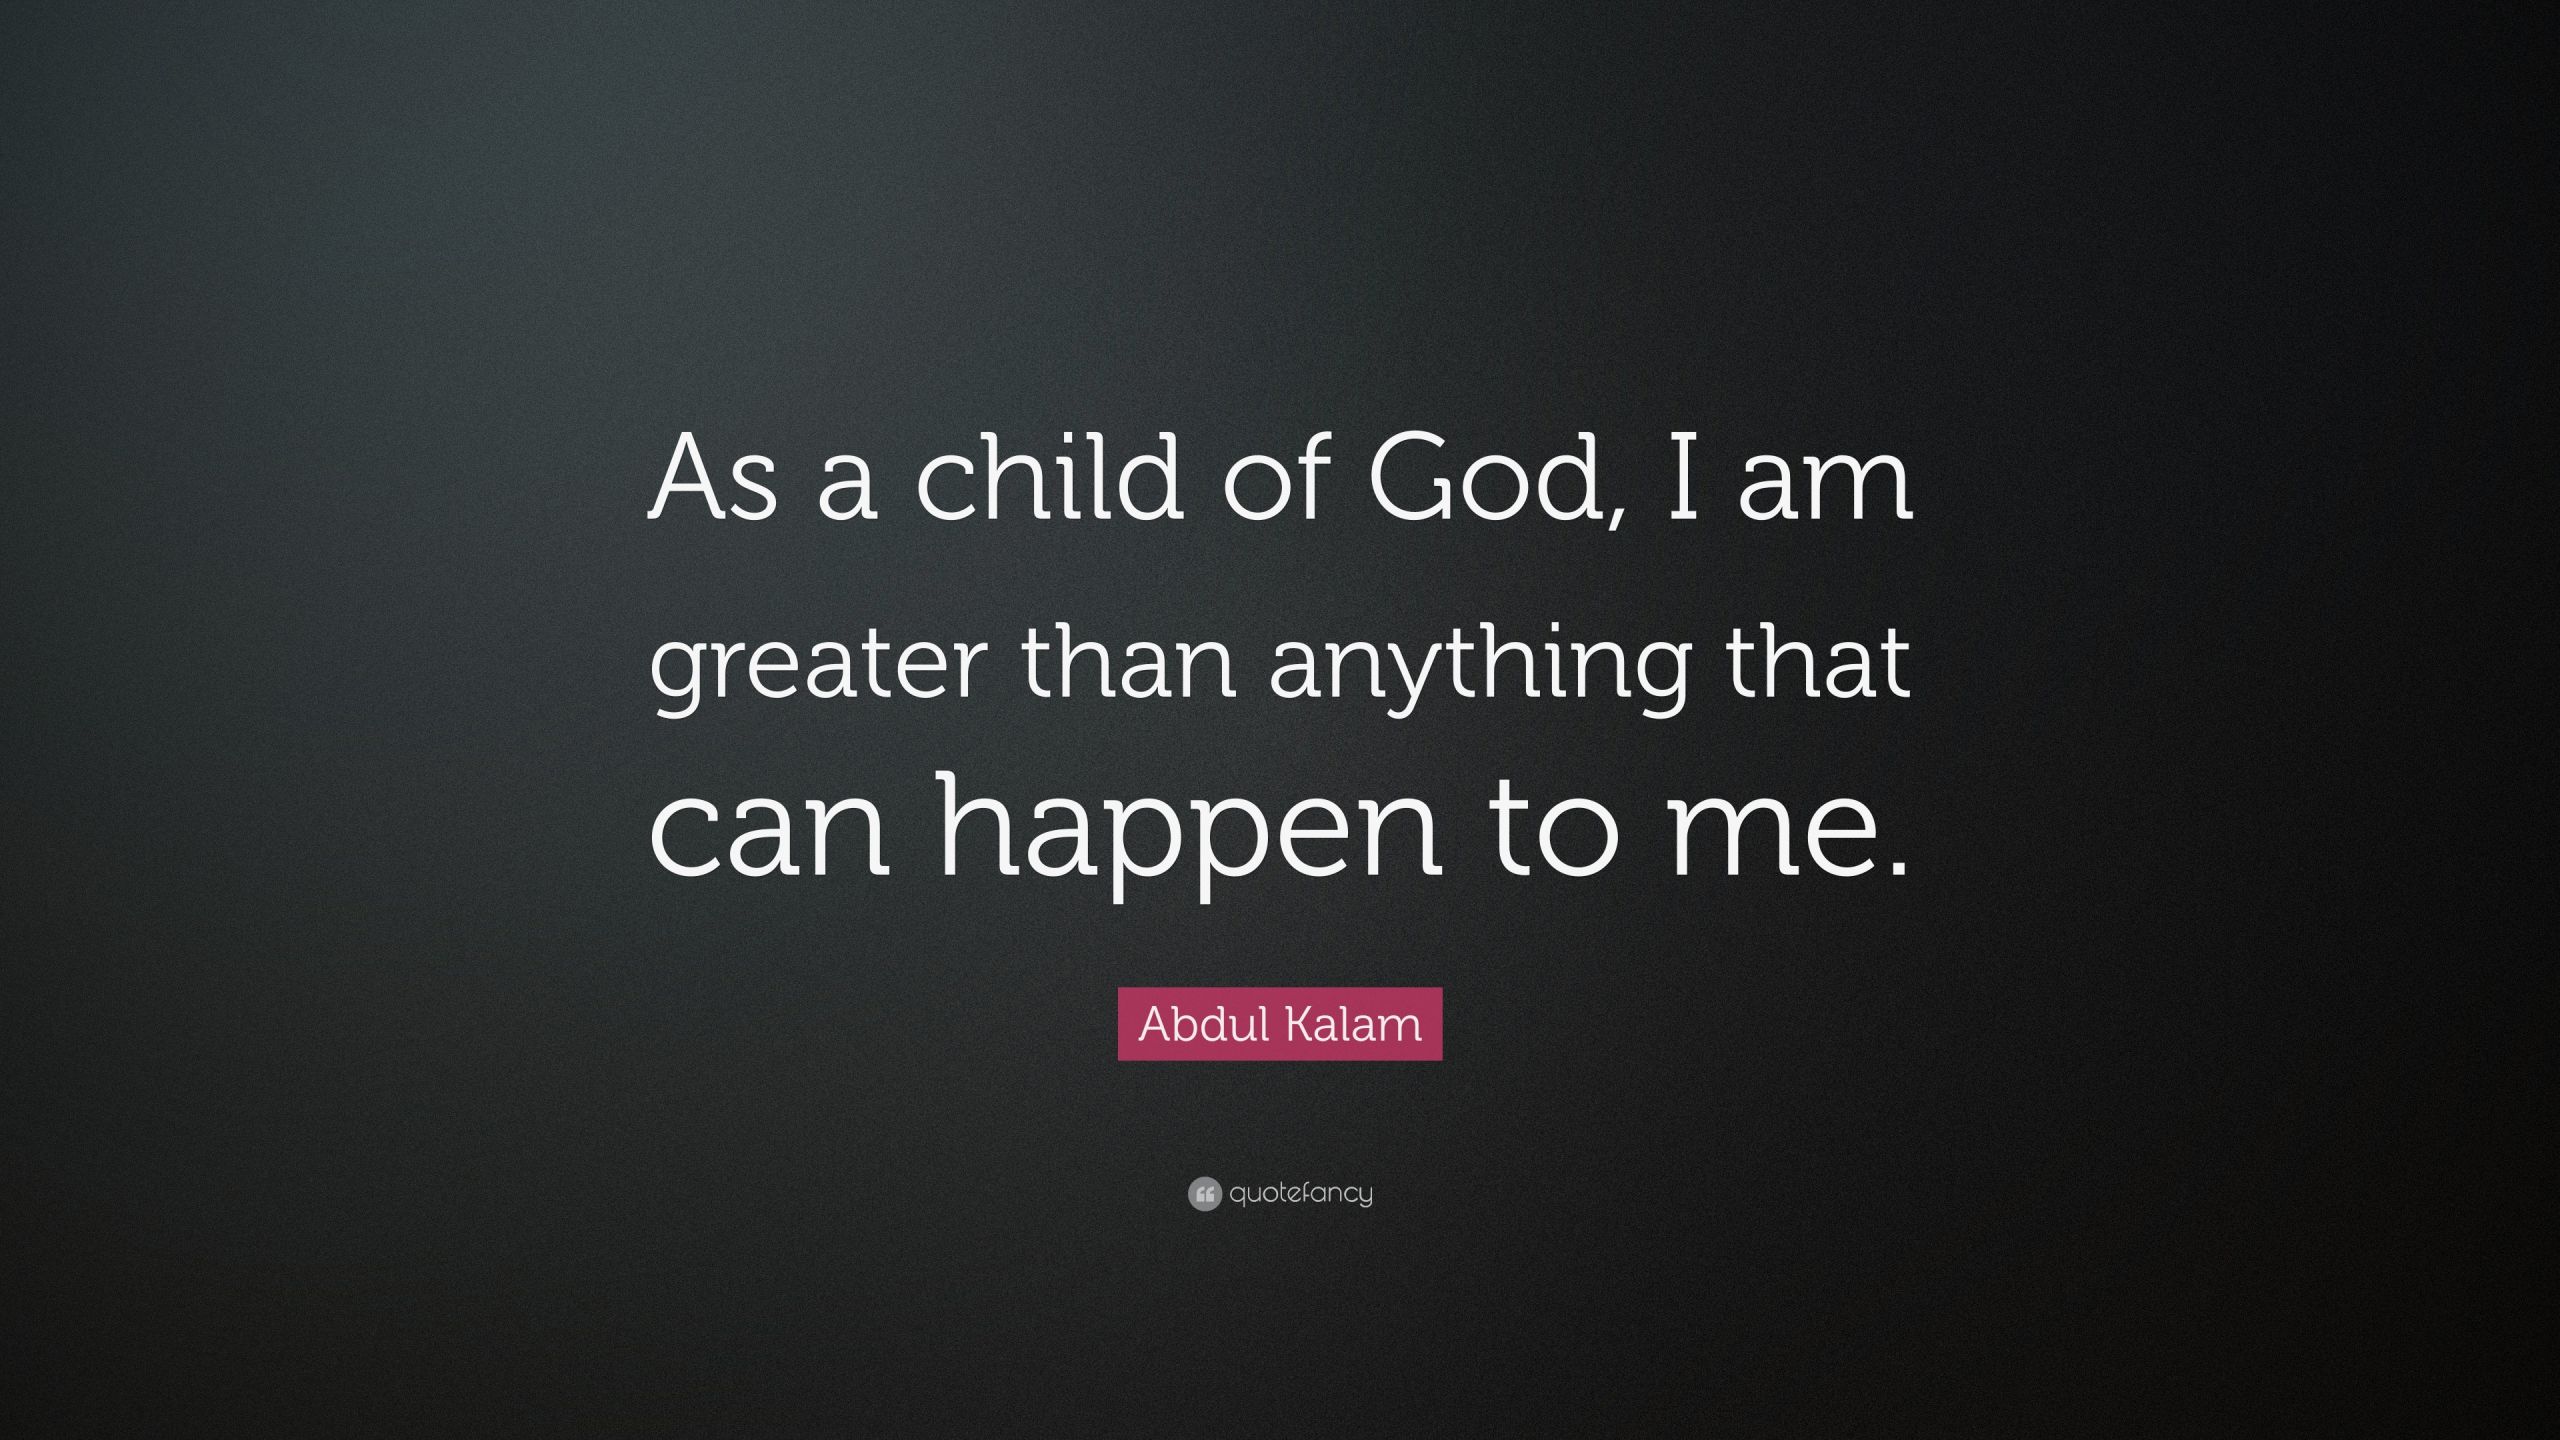 Children Of God Quote
 Abdul Kalam Quote “As a child of God I am greater than